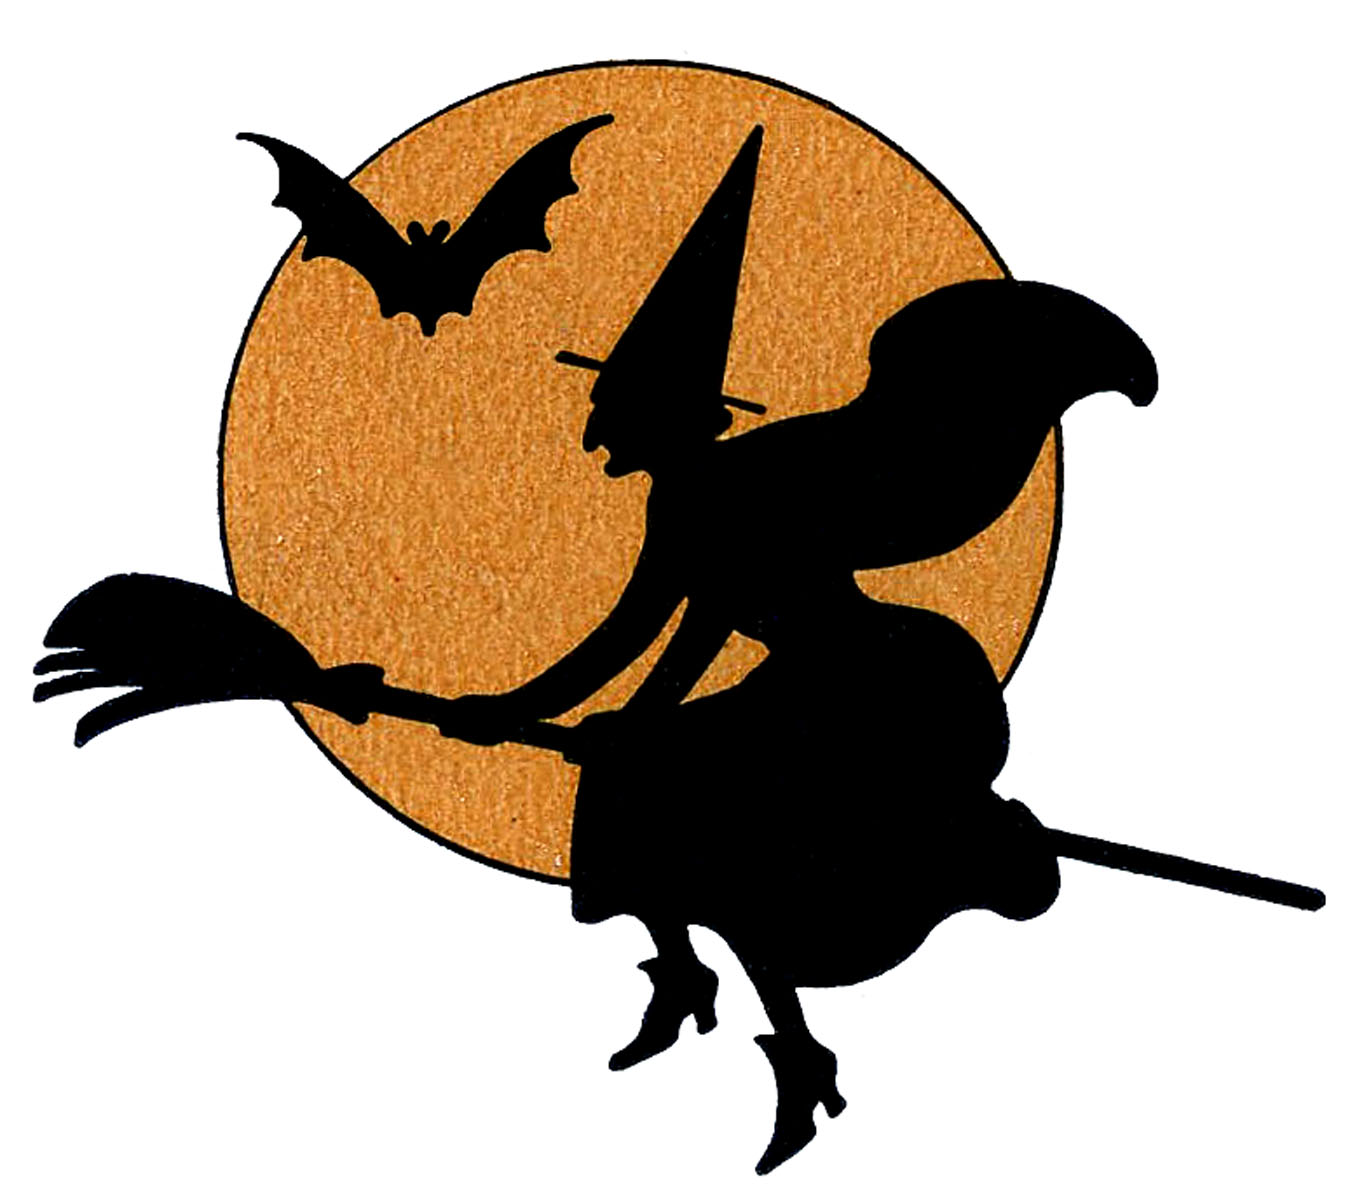 Halloween Clip Art Archives - Page 8 of 11 - The Graphics Fairy